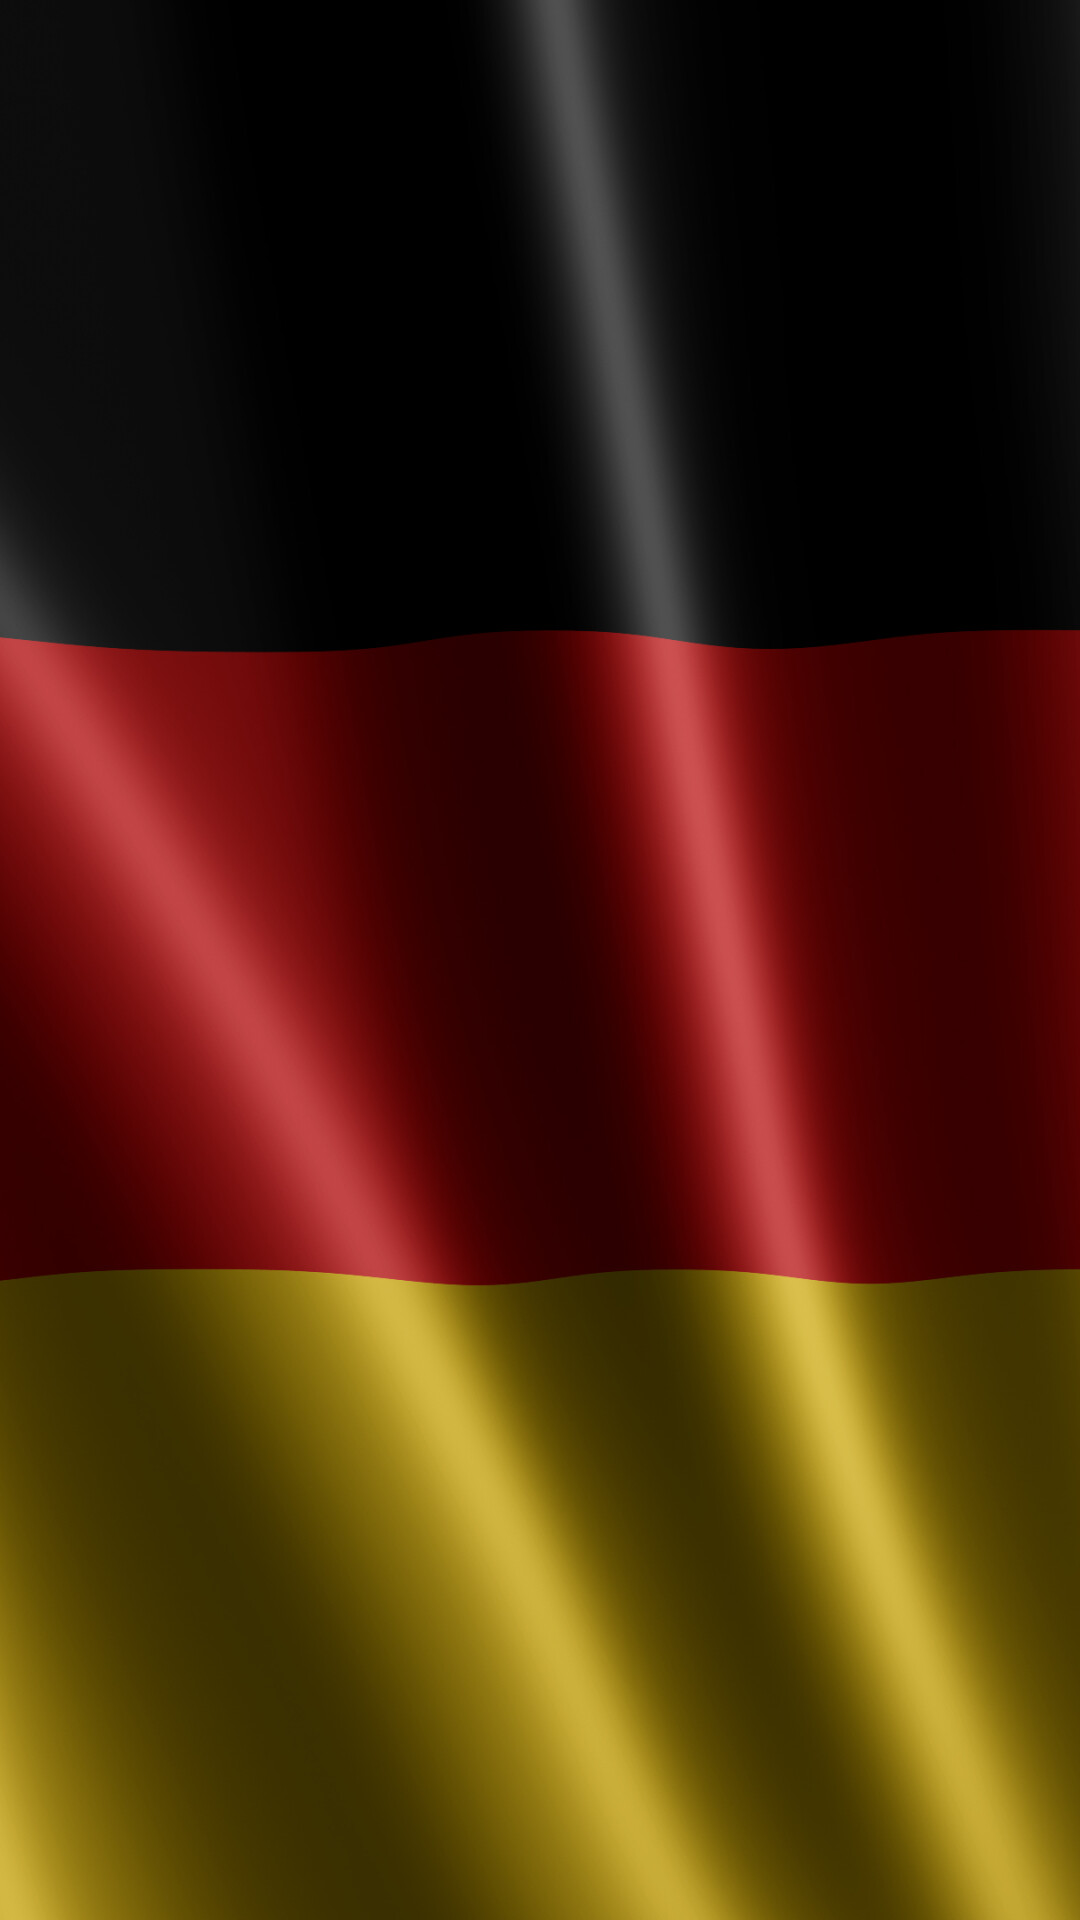 Flag of Germany: Sable, Tincture black, Gules, Or, Heraldry, The idea of a unified state, The Weimar Republic. 1080x1920 Full HD Wallpaper.